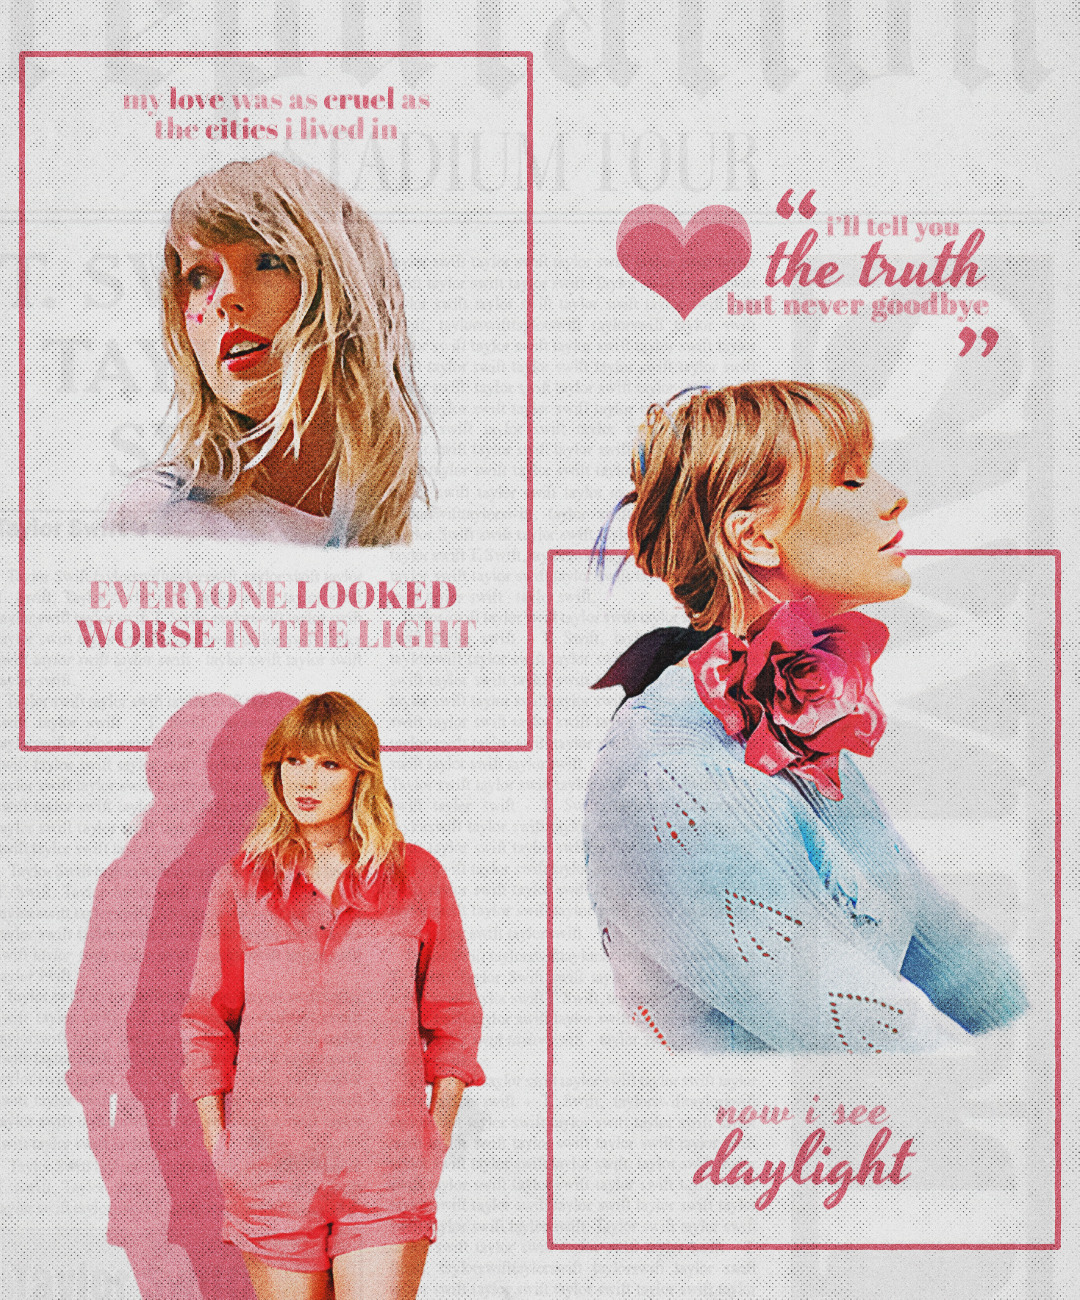 RED (Taylor's version) songs as postal stamp designs based on their  location. Credit: @tswiftconcepts on insta : r/TaylorSwift